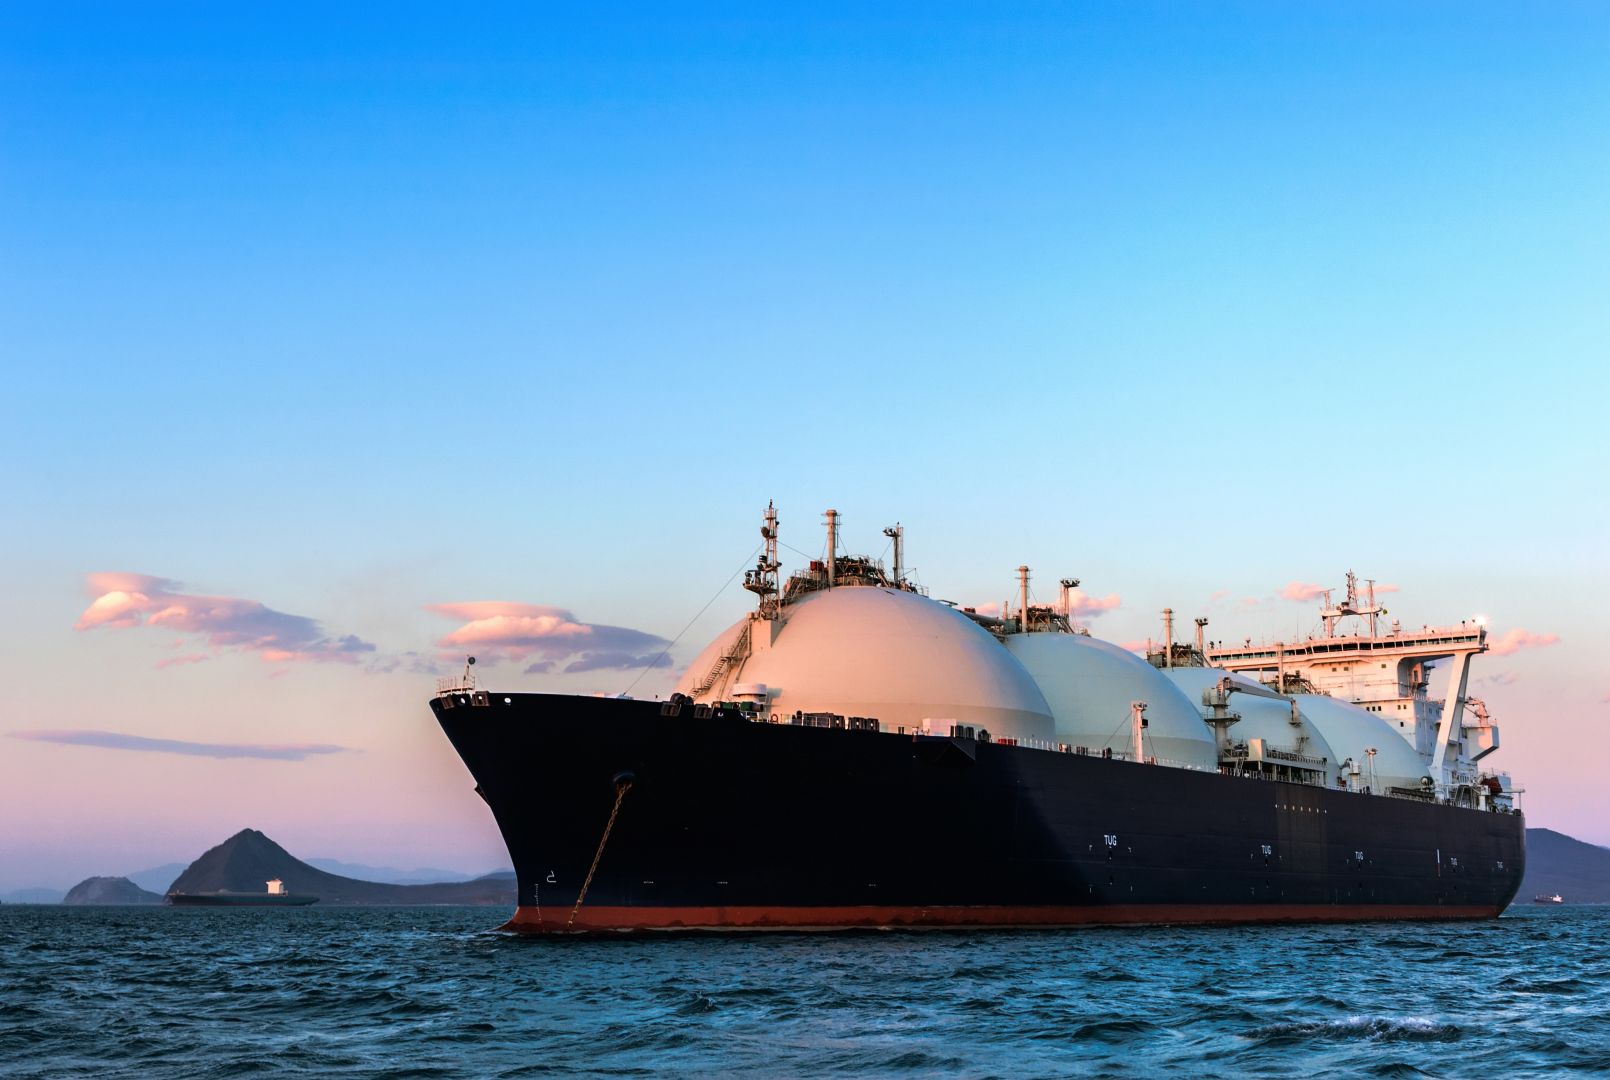 Global LNG supply to increase by 2.5-3 percent as of 2020